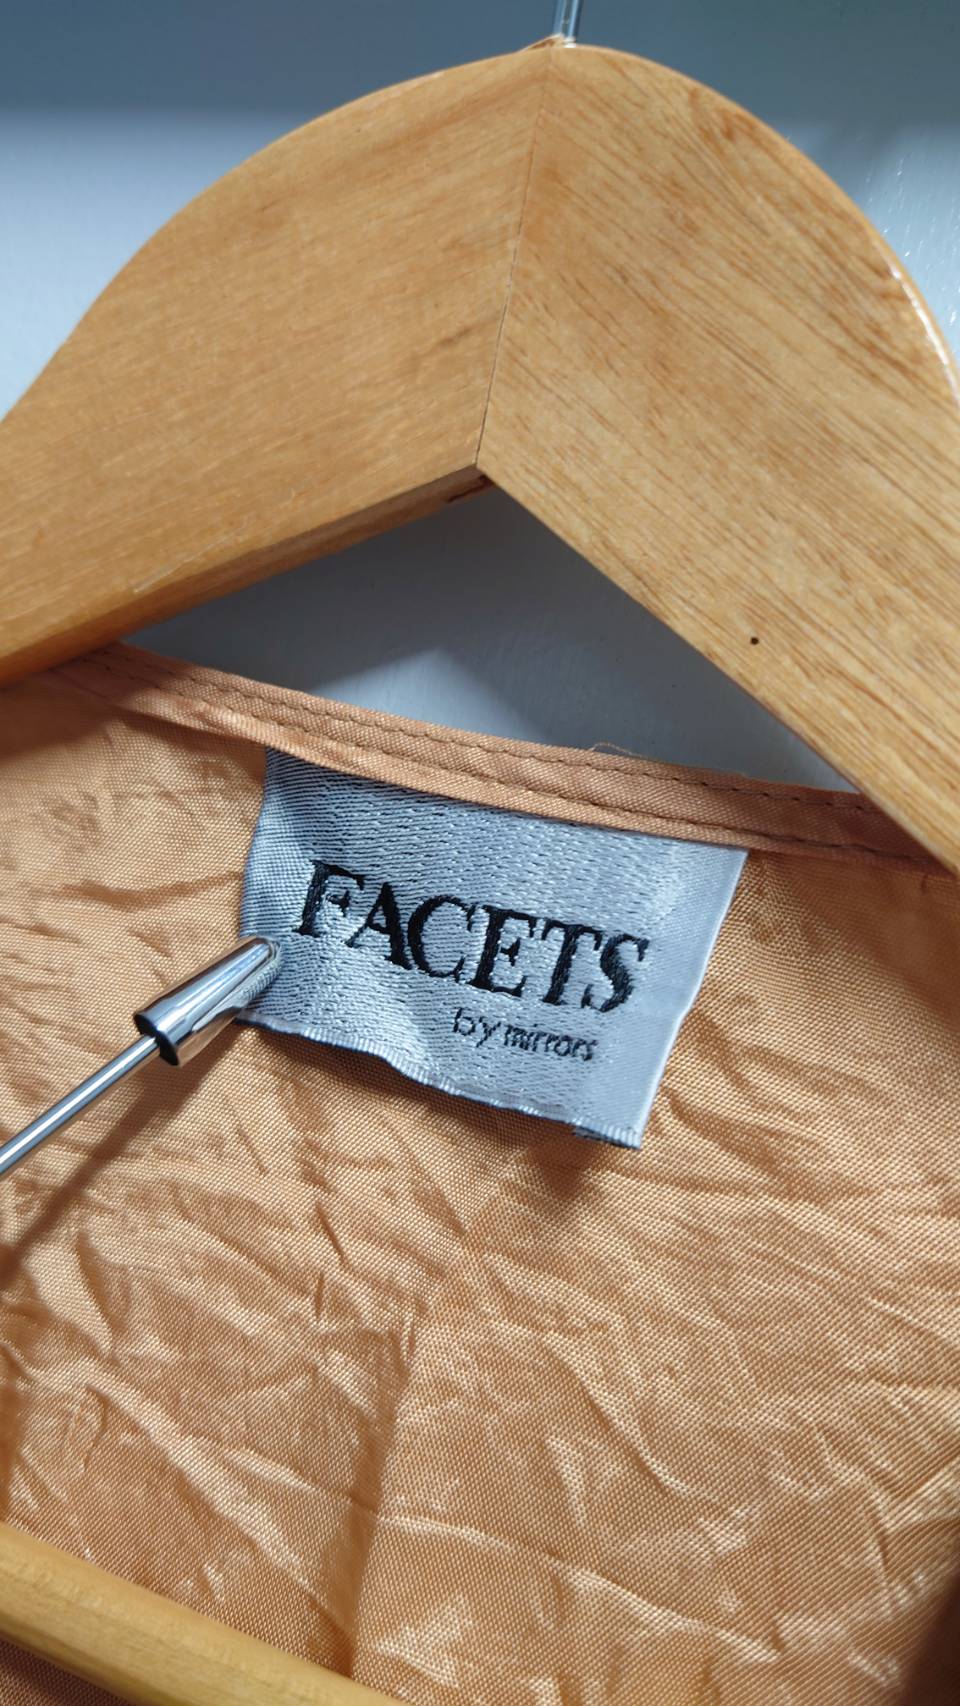 FACETS by mirrors 刺繍 ベスト ジレ USA ヴィンテージ